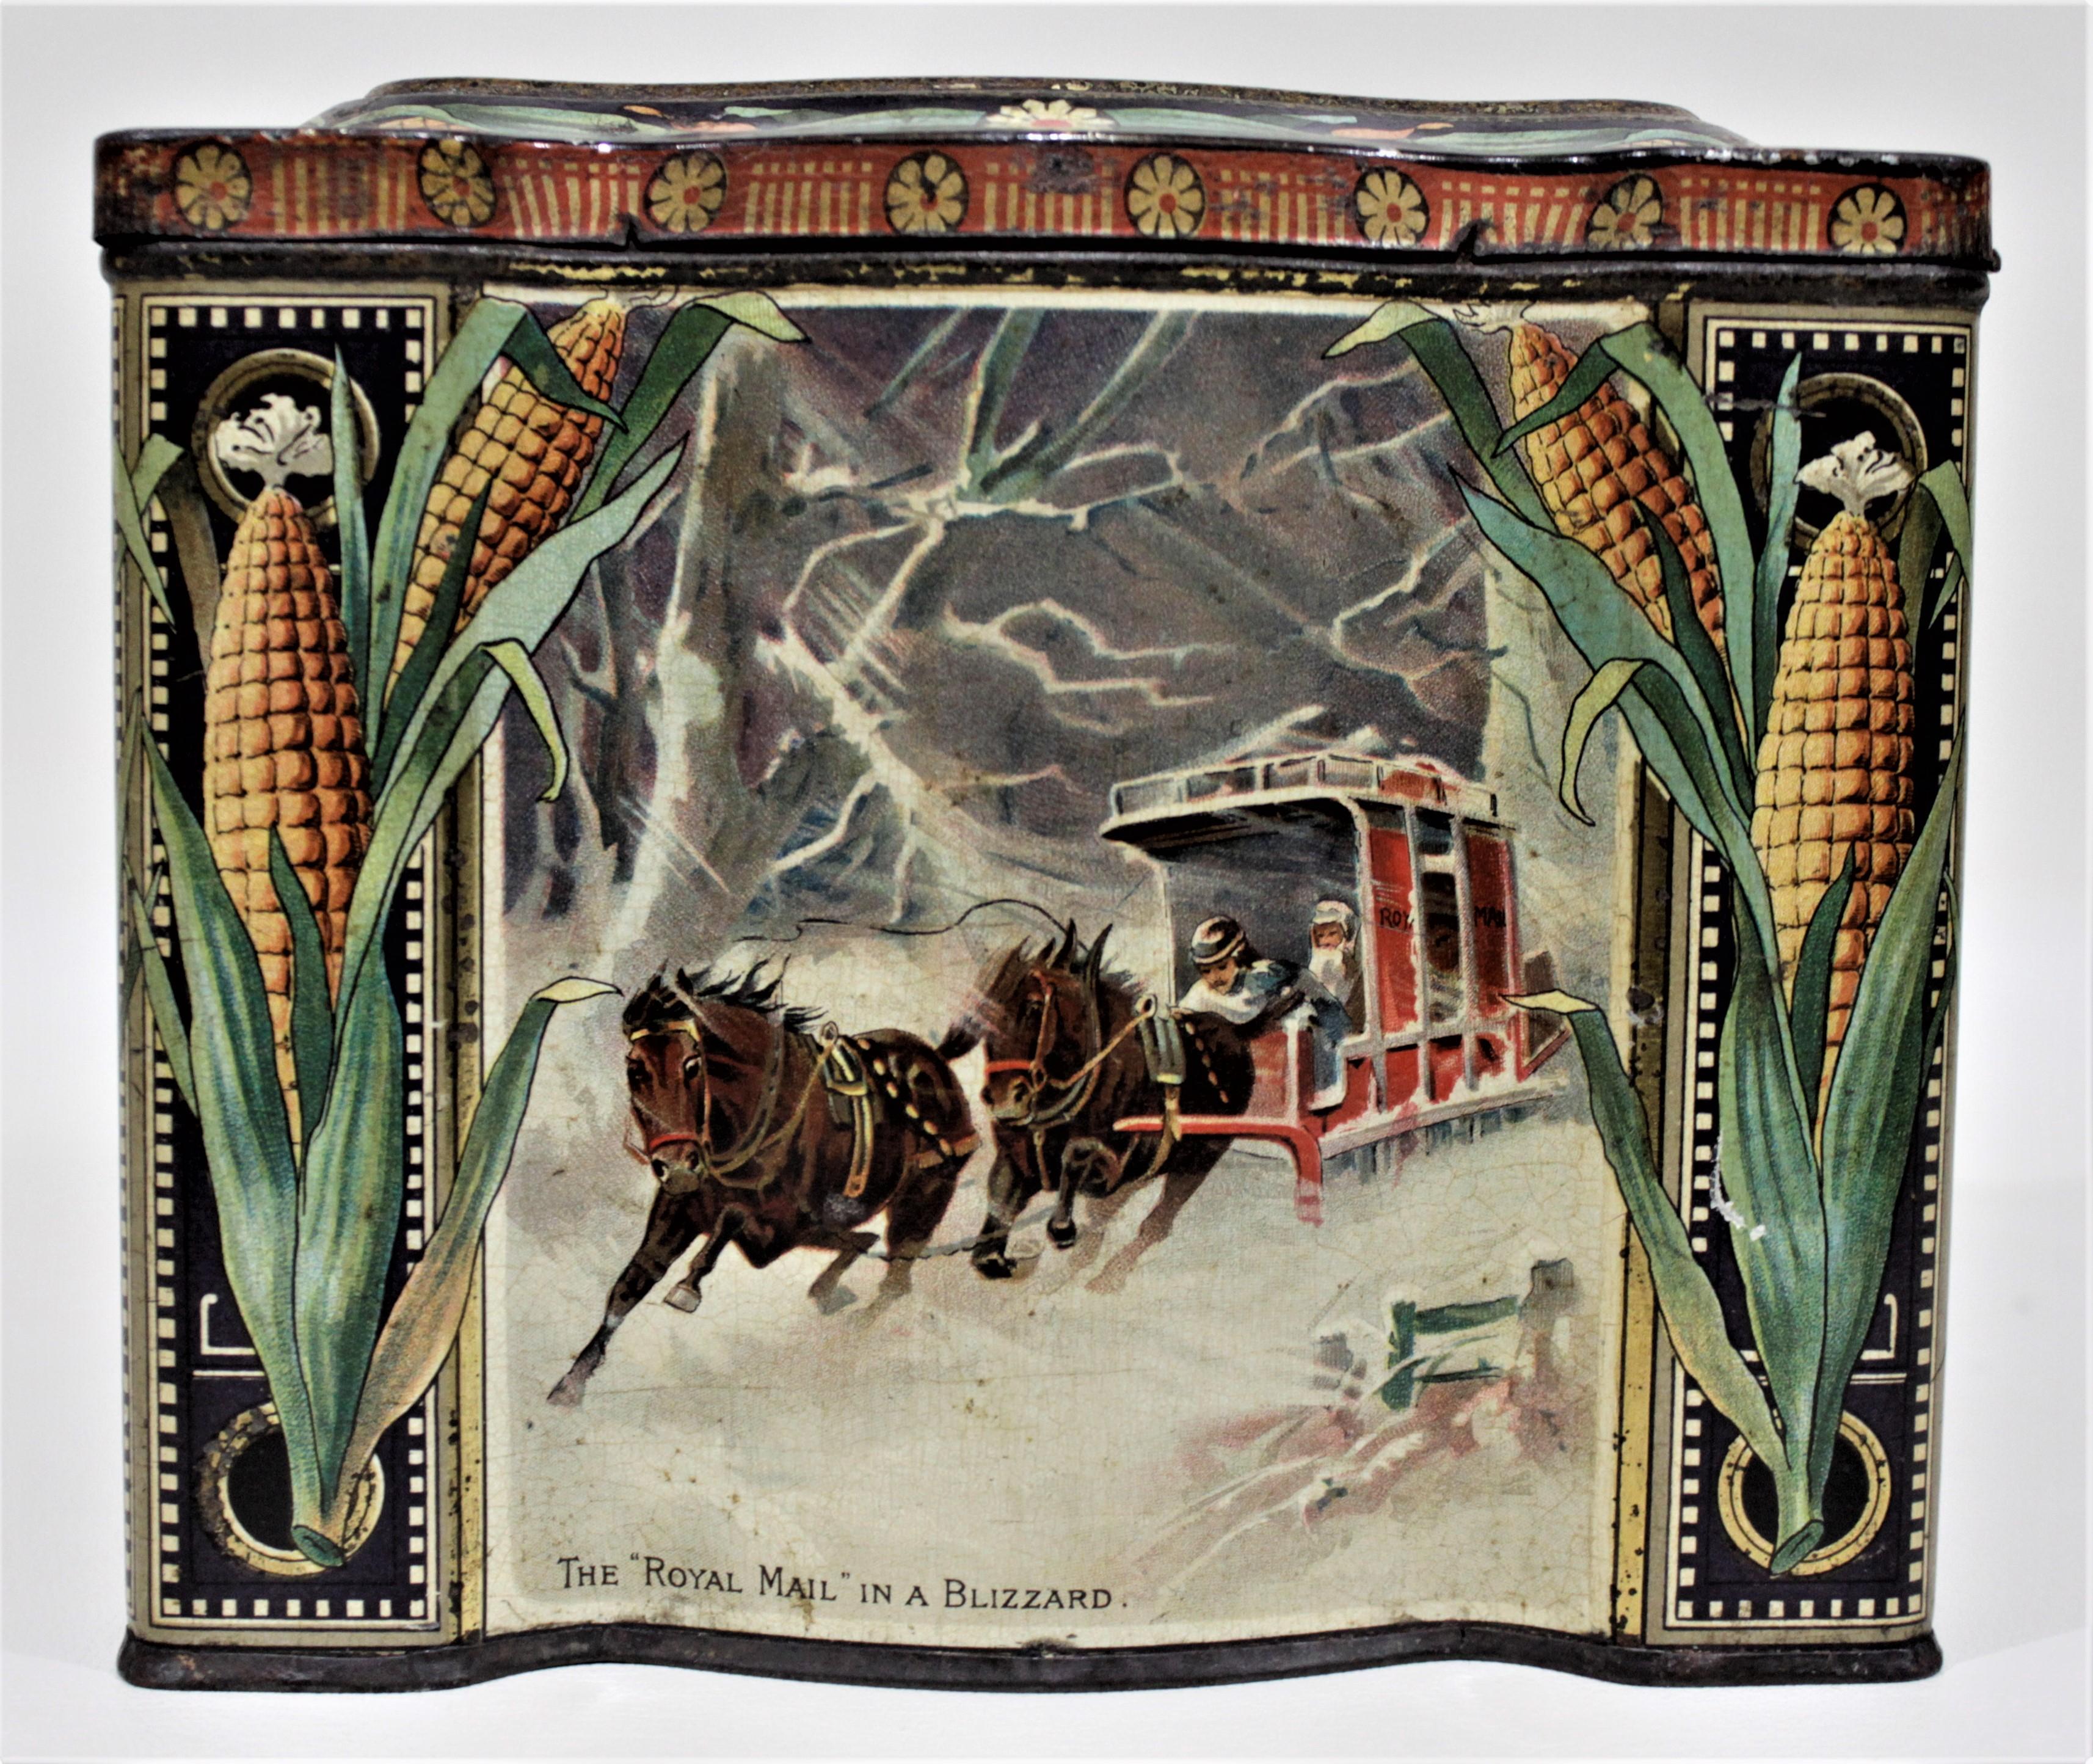 Victorian Antique Keen's Mustard Advertising Tin with Indigenous American & Western Scenes